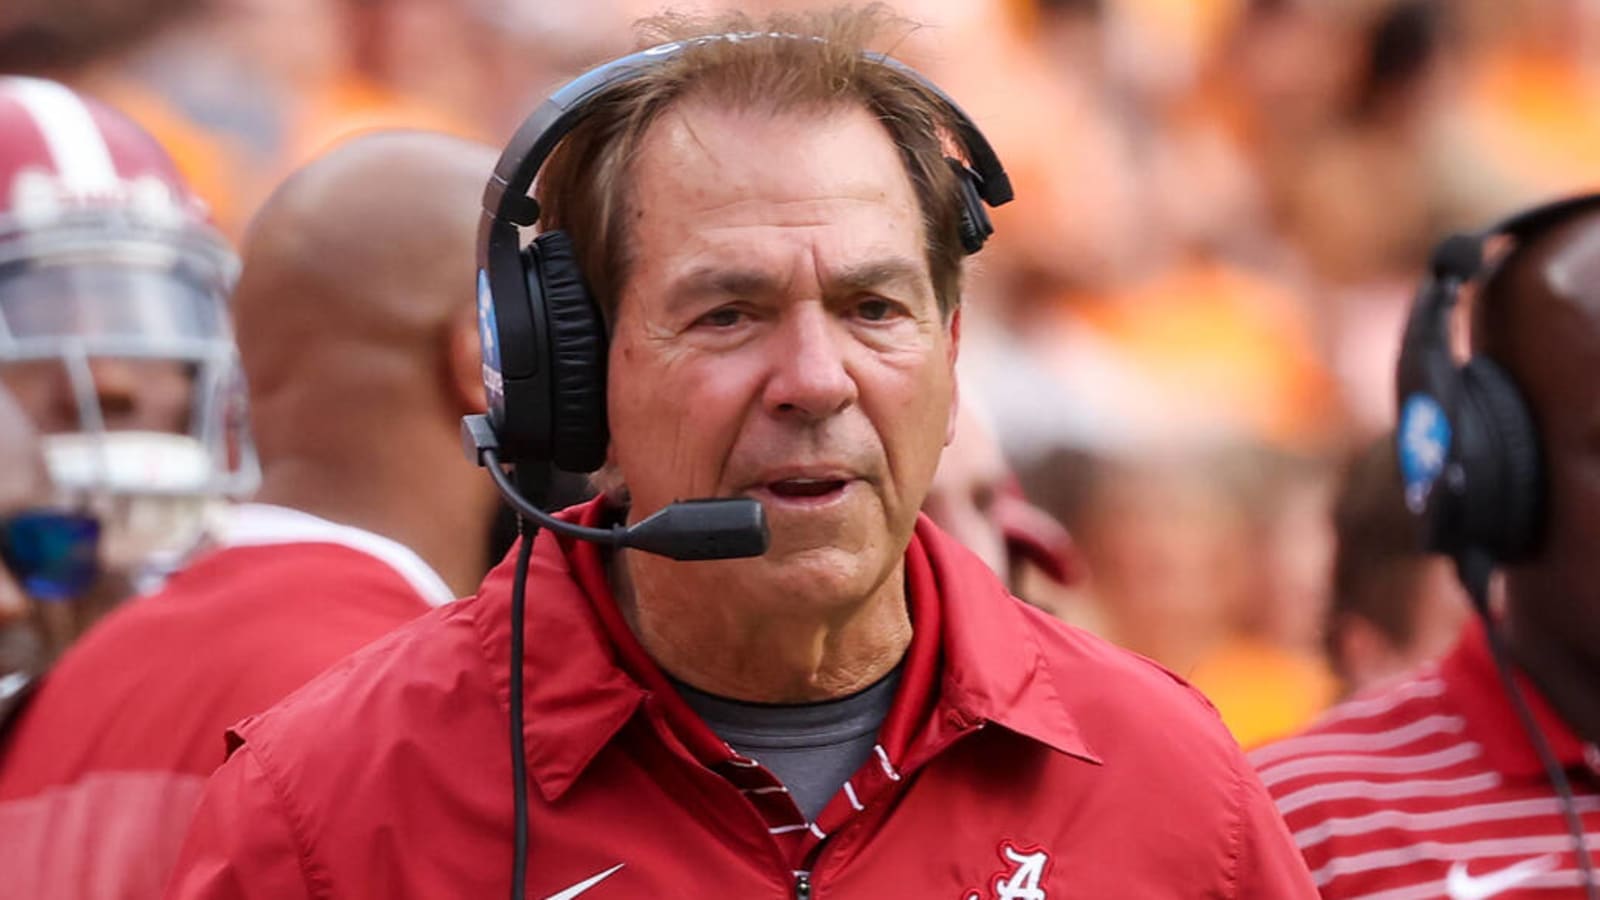 Analyst: Alabama should have run ball more at end of game